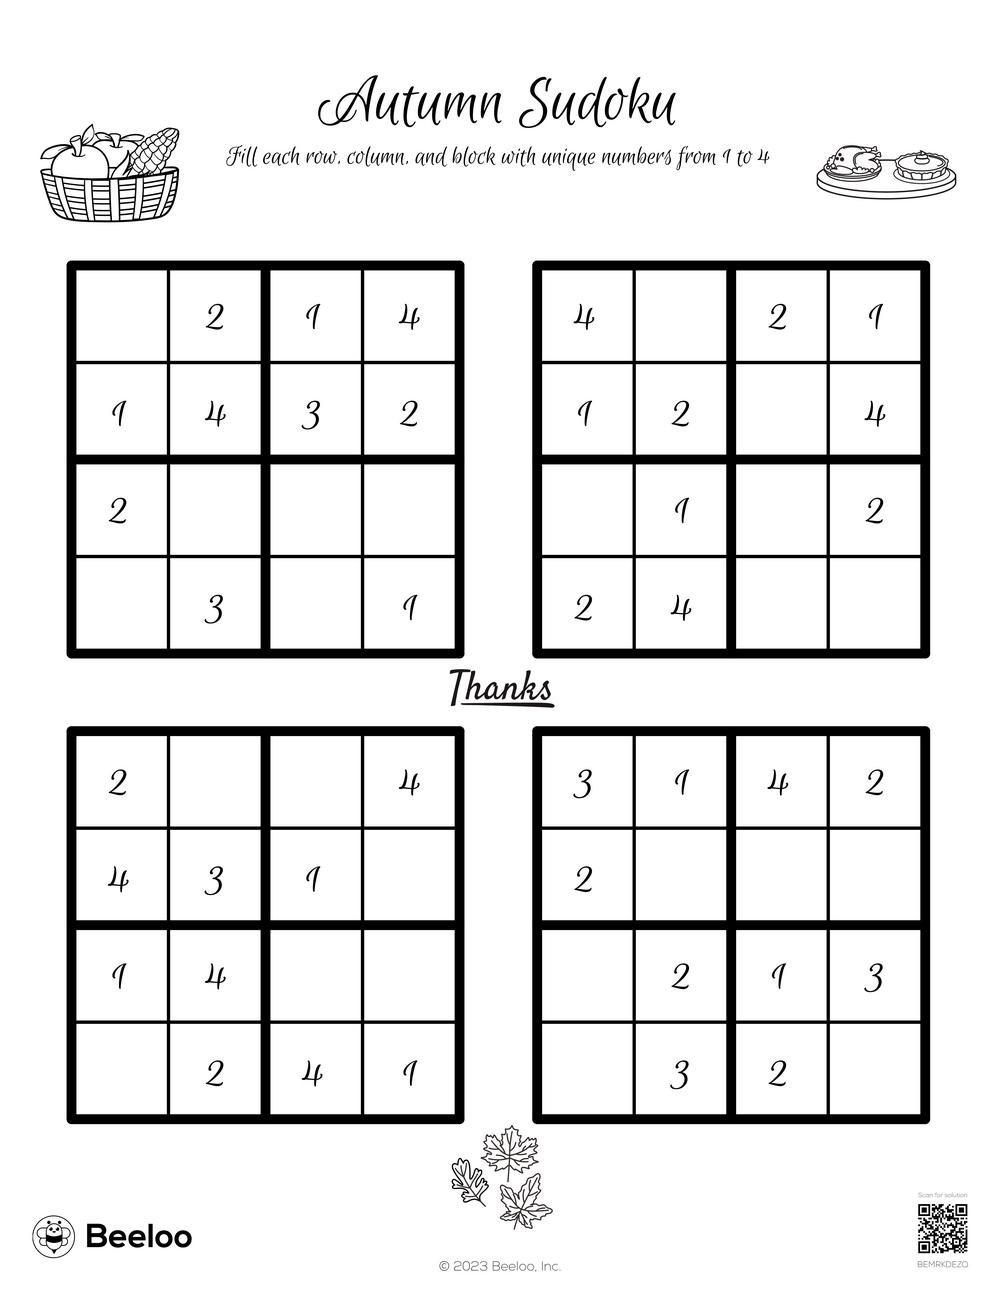 Autumn sudoku â printable crafts and activities for kids